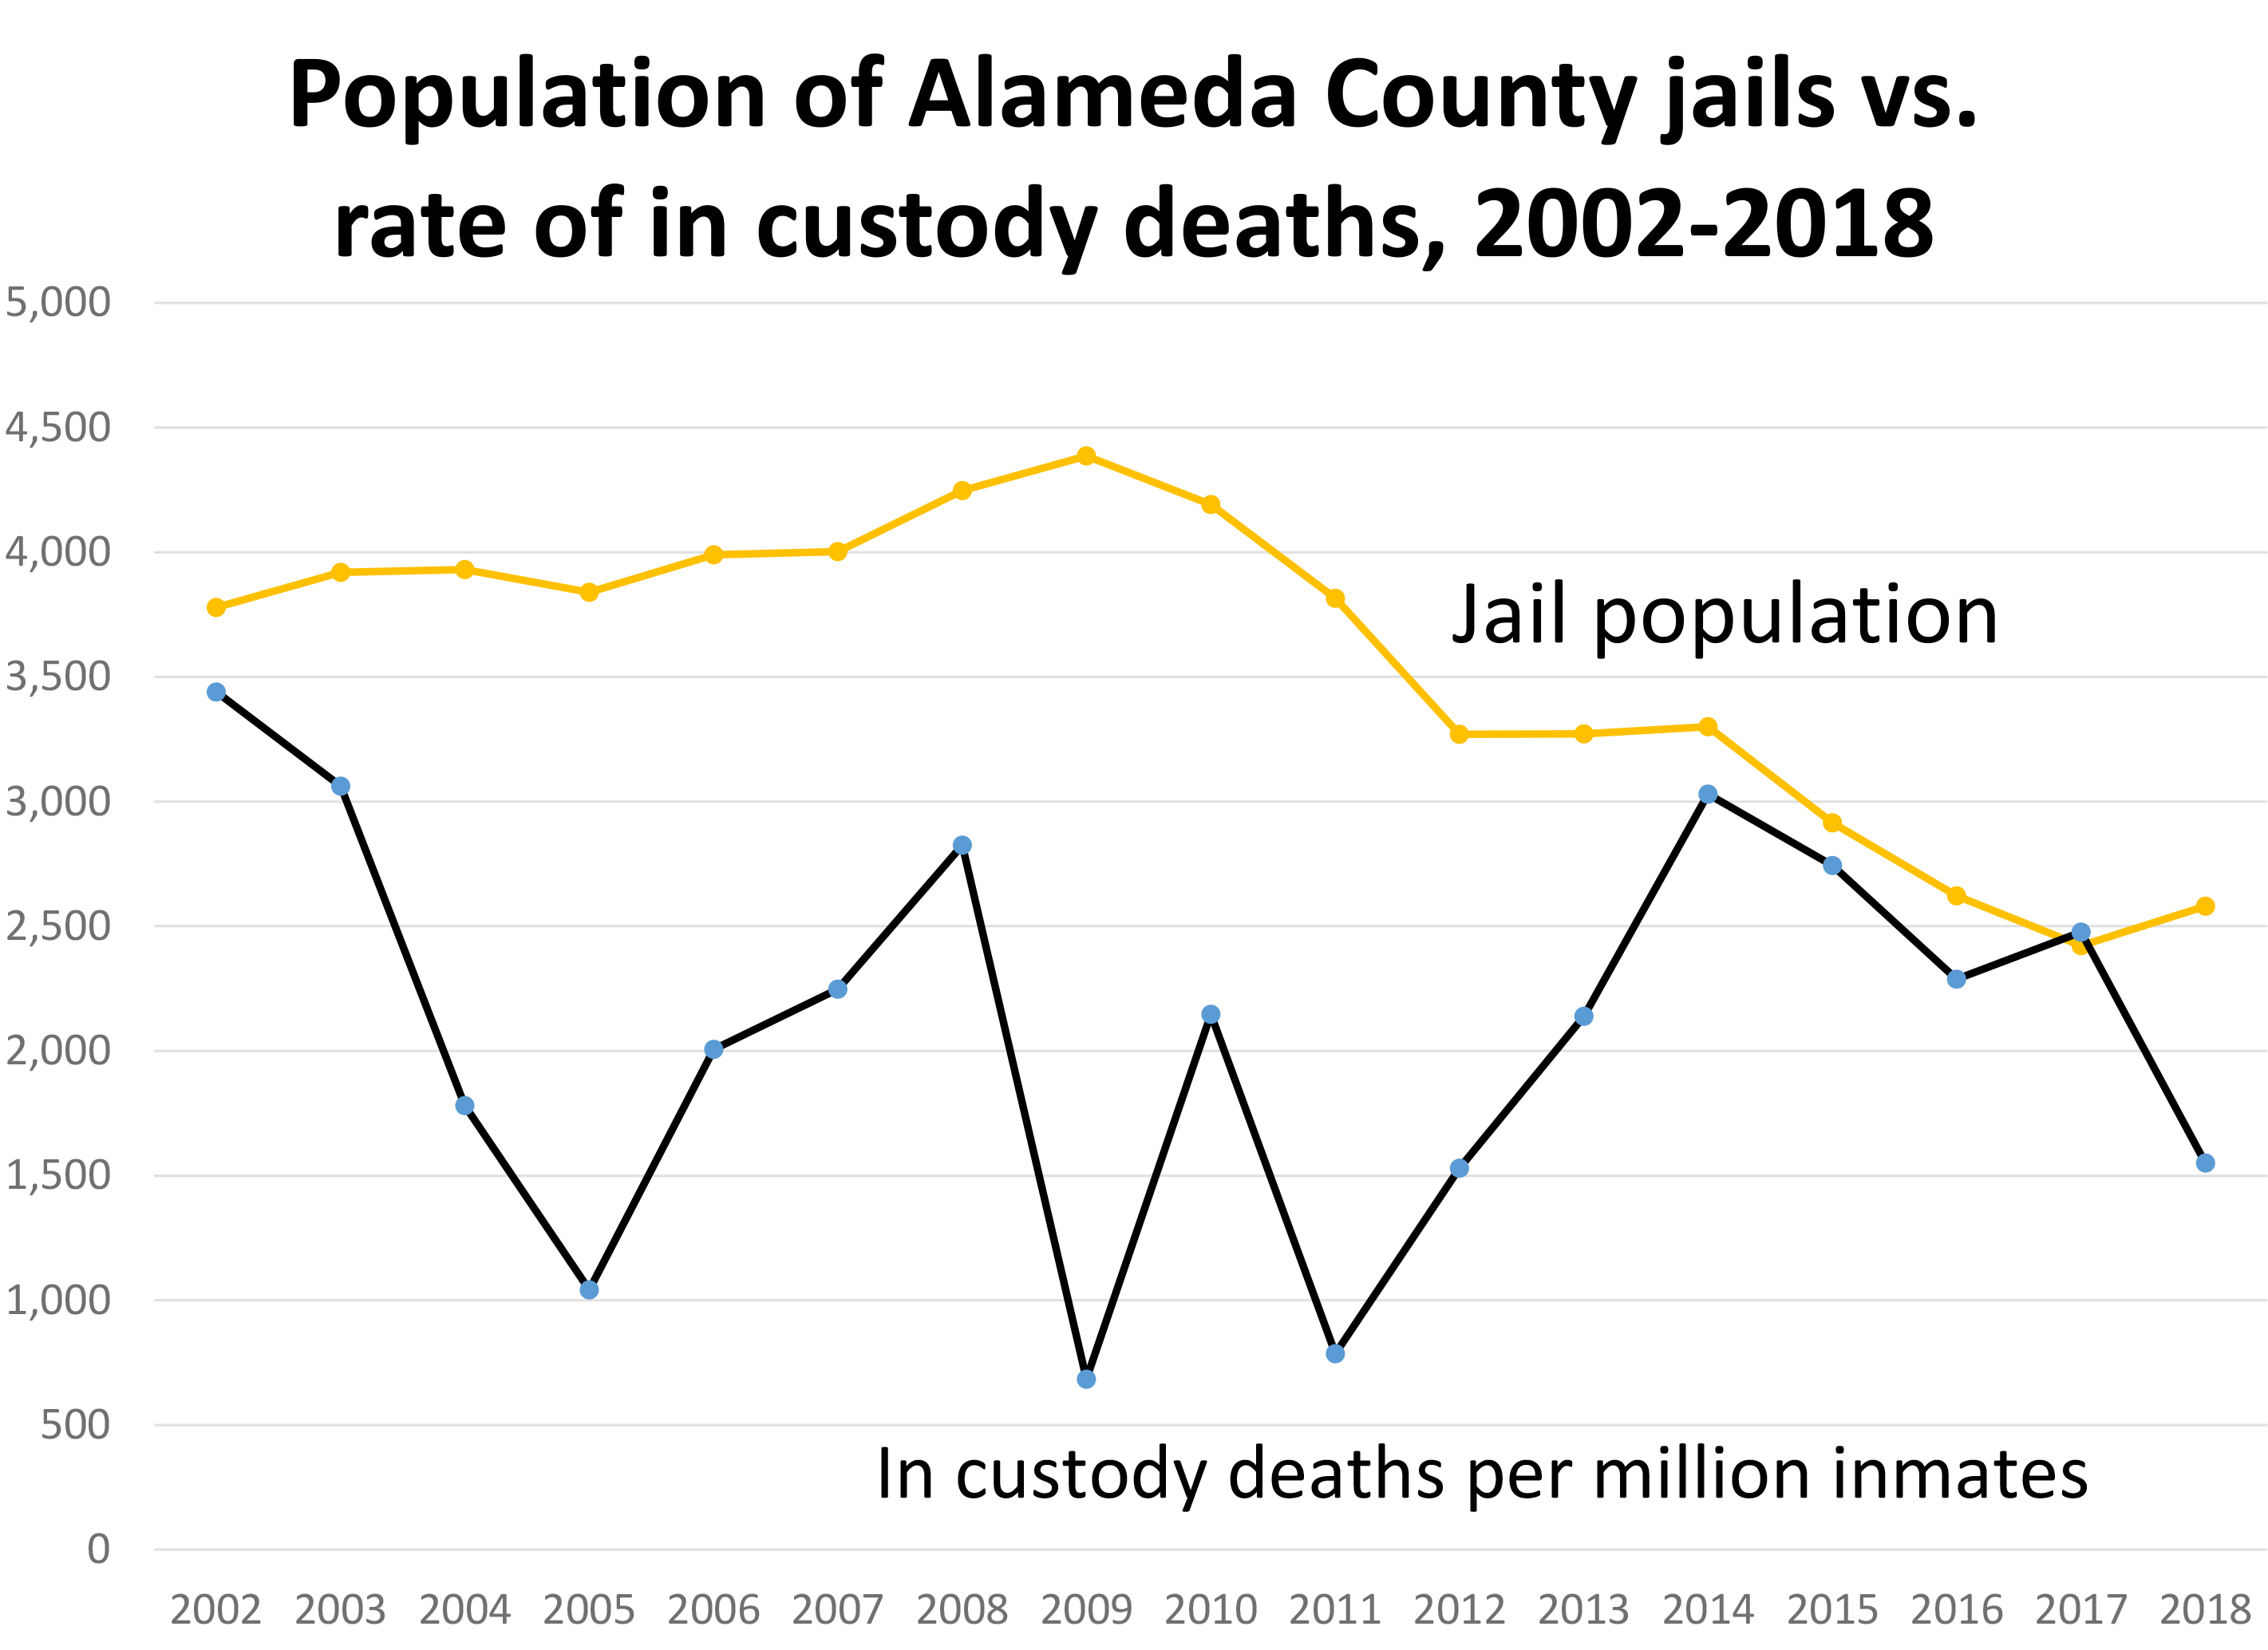 Population of Alameda County jails vs. rate of jail deaths, 2002-2018. Data: state of California